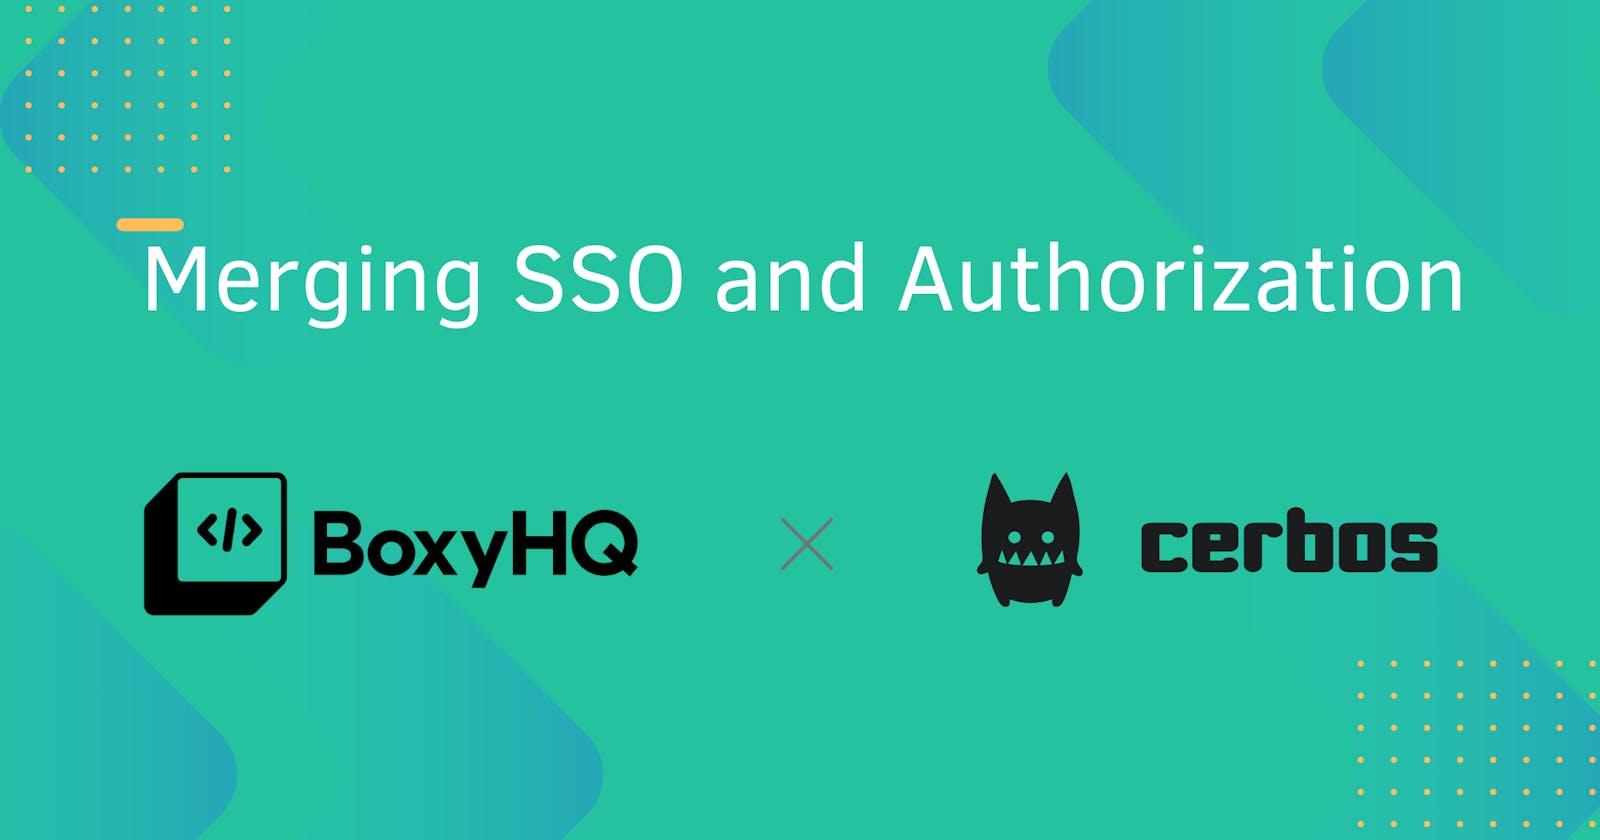 BoxyHQ + Cerbos: Merging SSO and Authorization